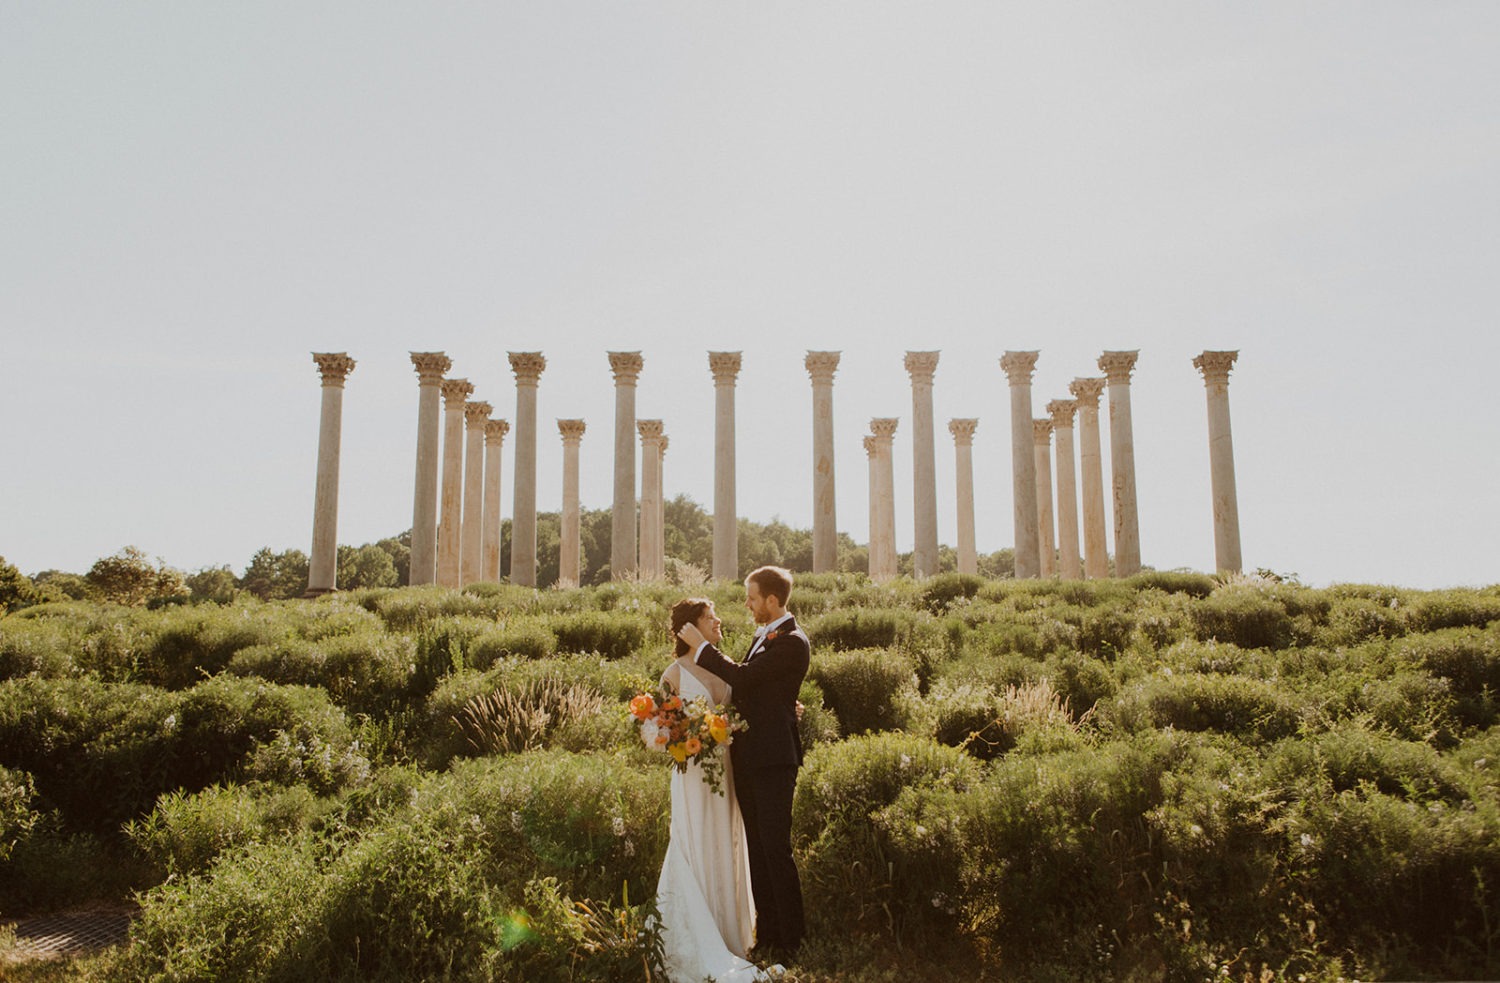 Newlyweds stand together in front of Capitol Columns at National Arboretum DC wedding